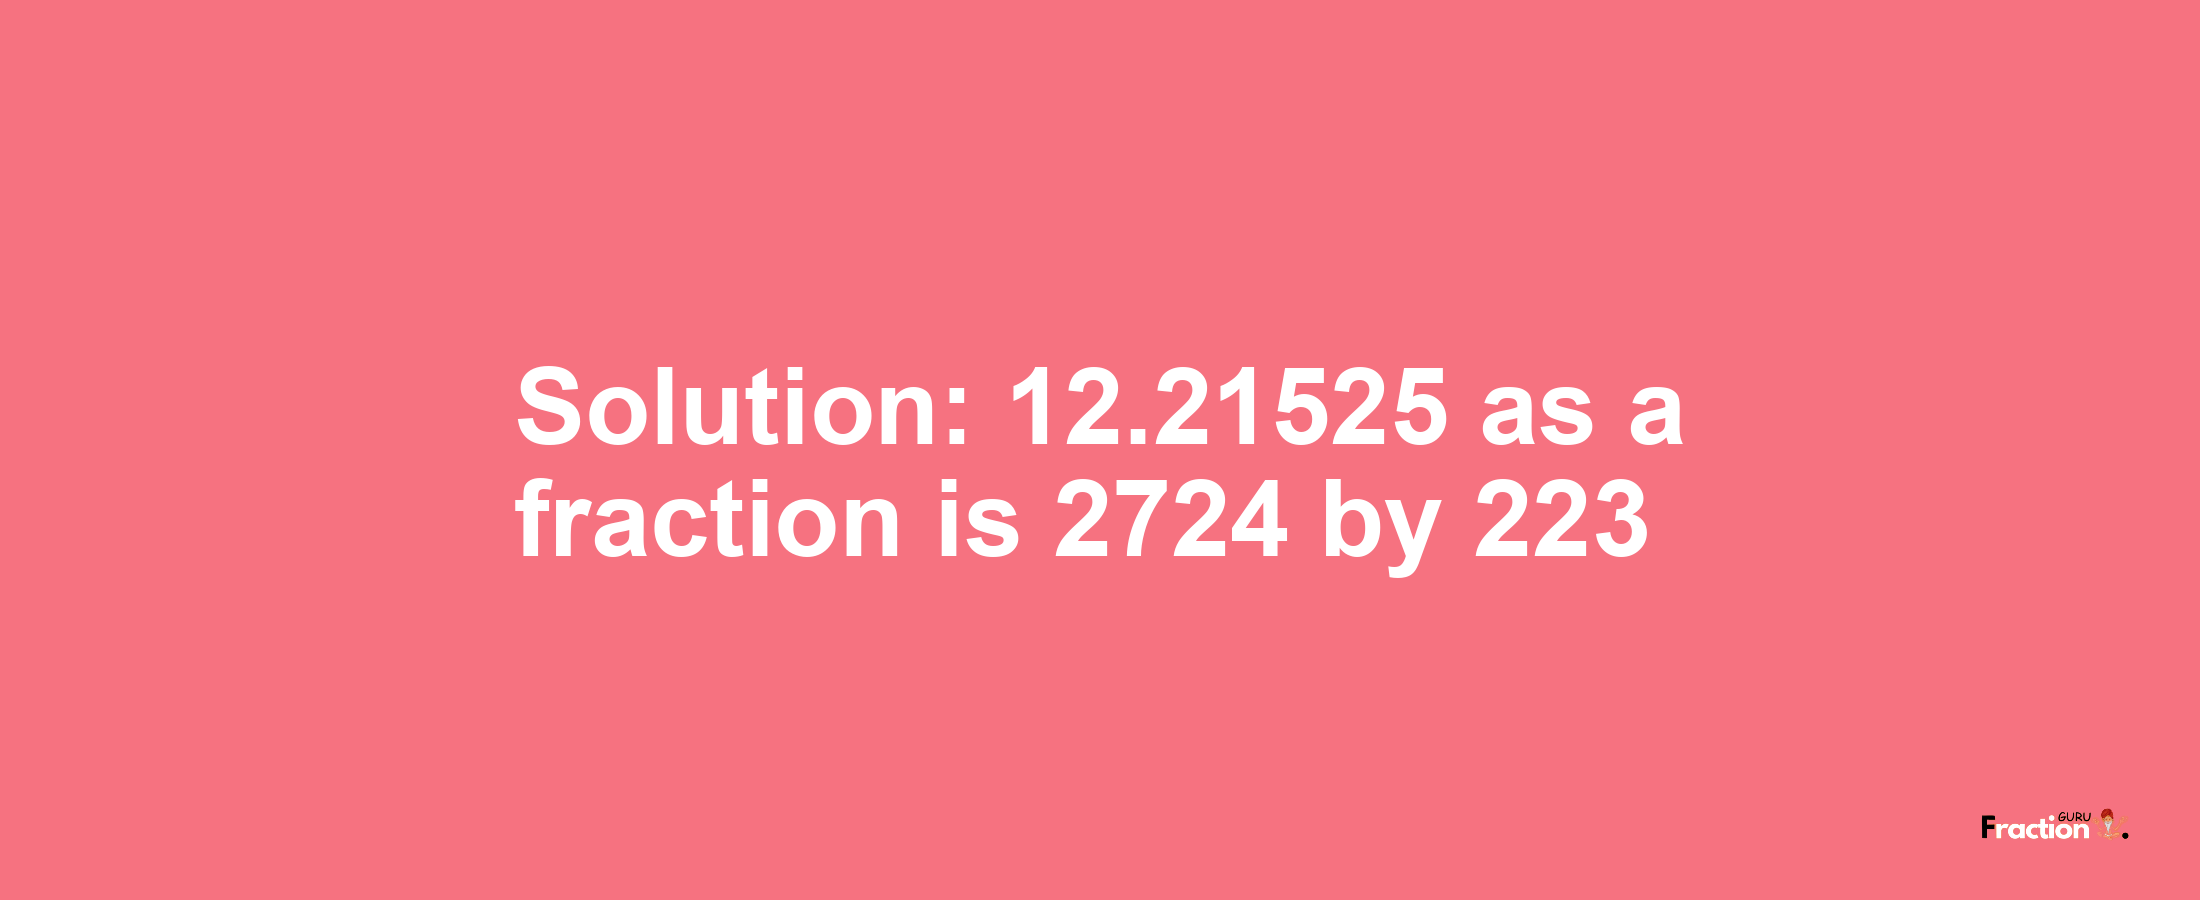 Solution:12.21525 as a fraction is 2724/223